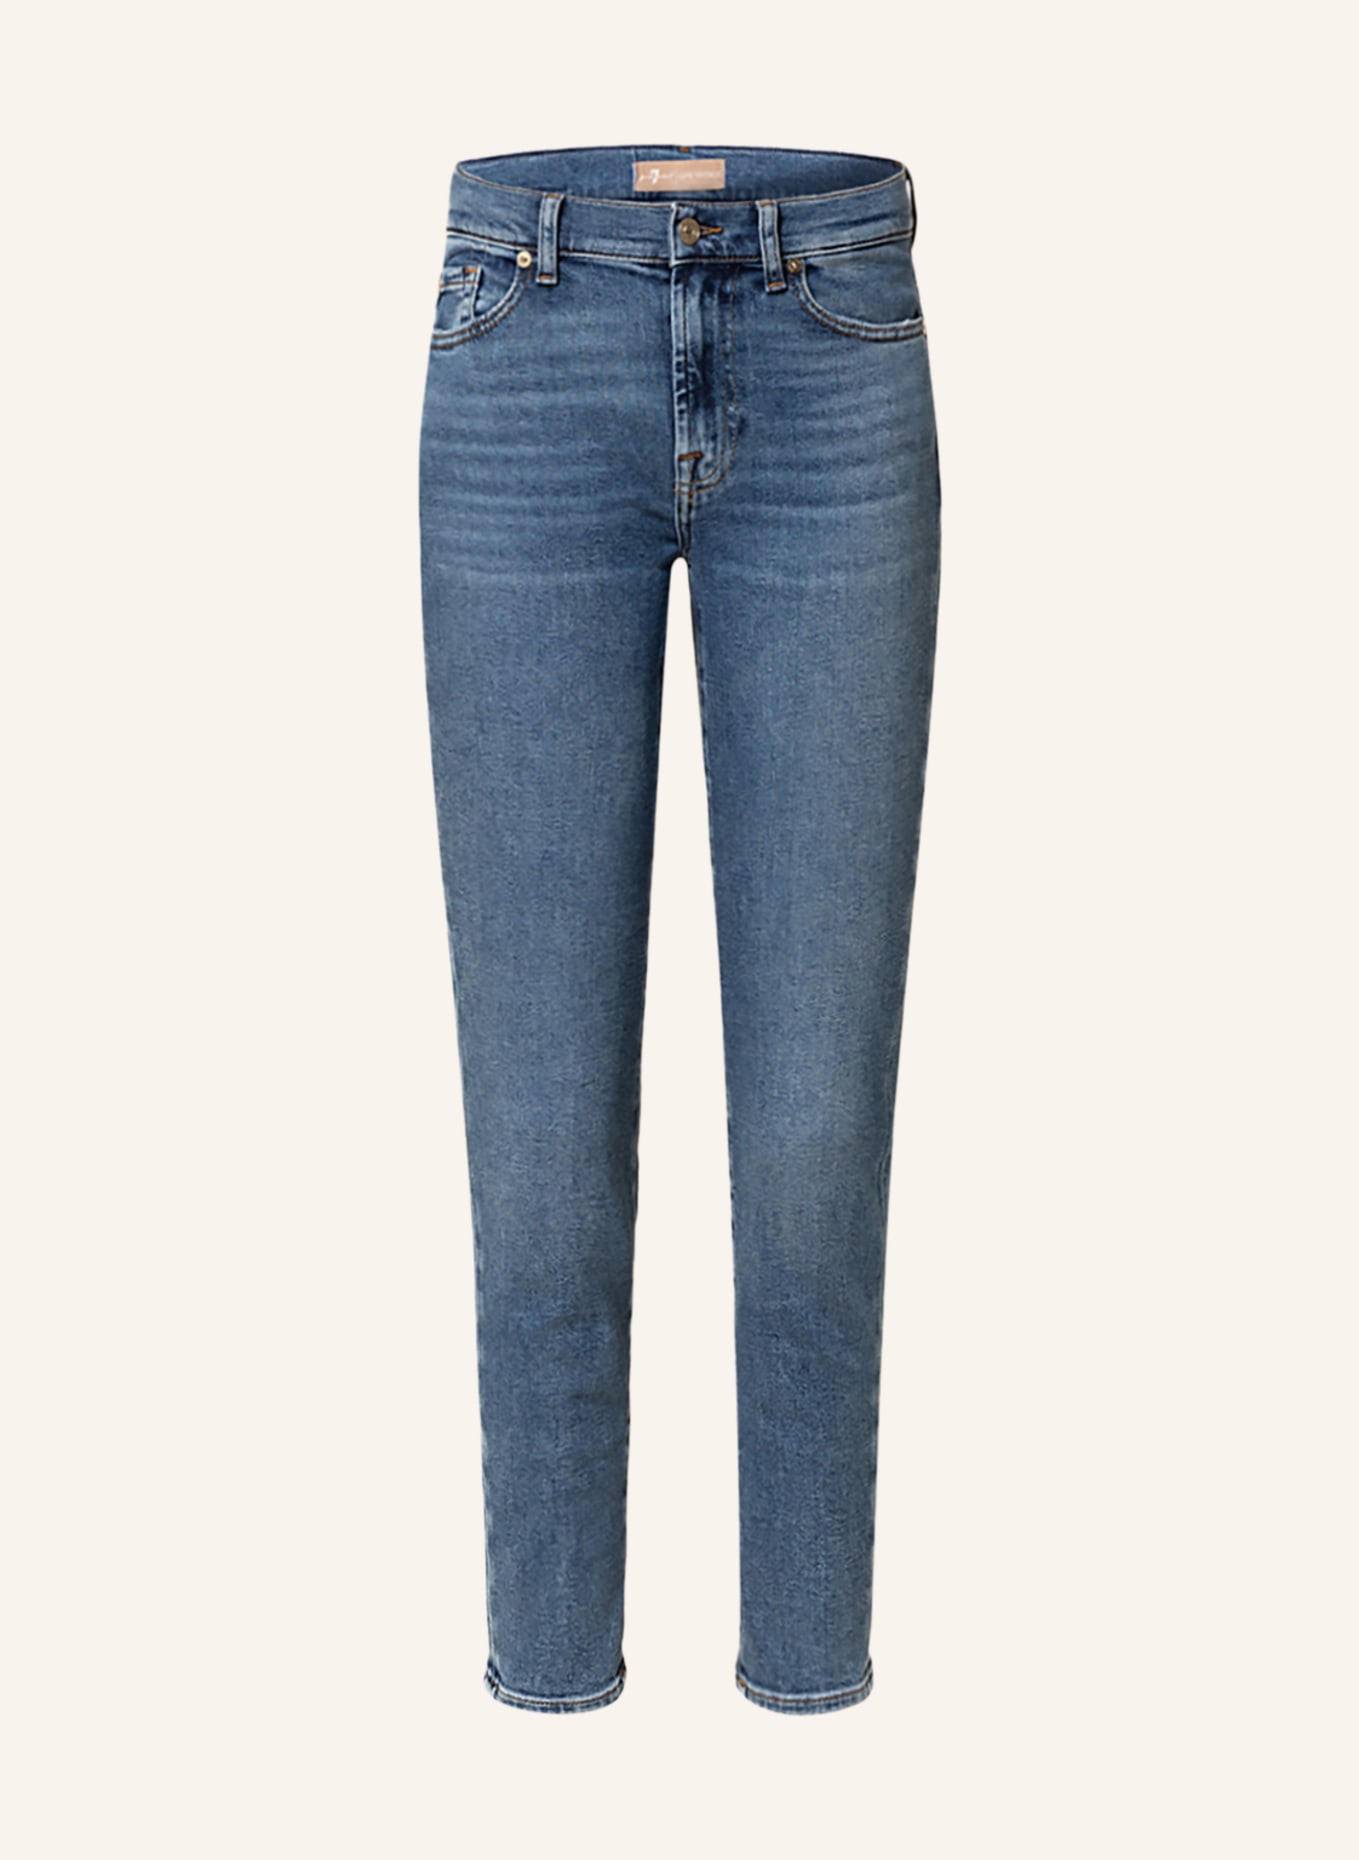 7 for all mankind Skinny Jeans ROXANNE ANKLE, Farbe: XI MID BLUE (Bild 1)